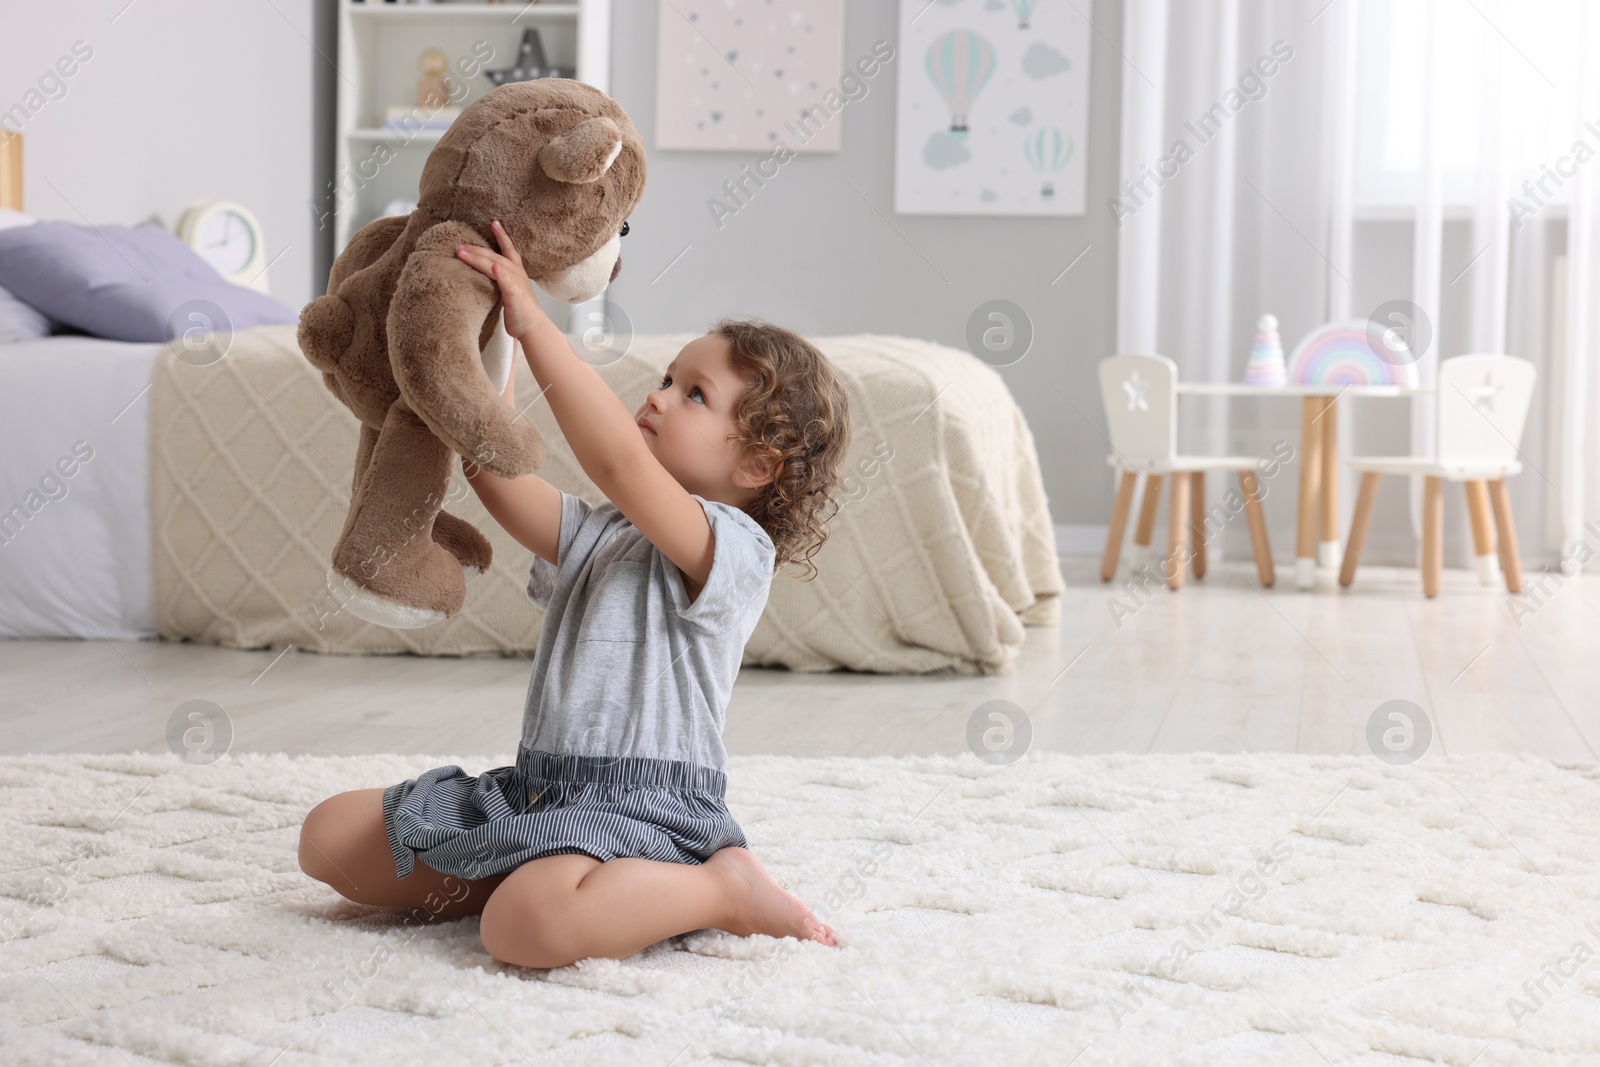 Photo of Cute little girl playing with teddy bear on floor at home